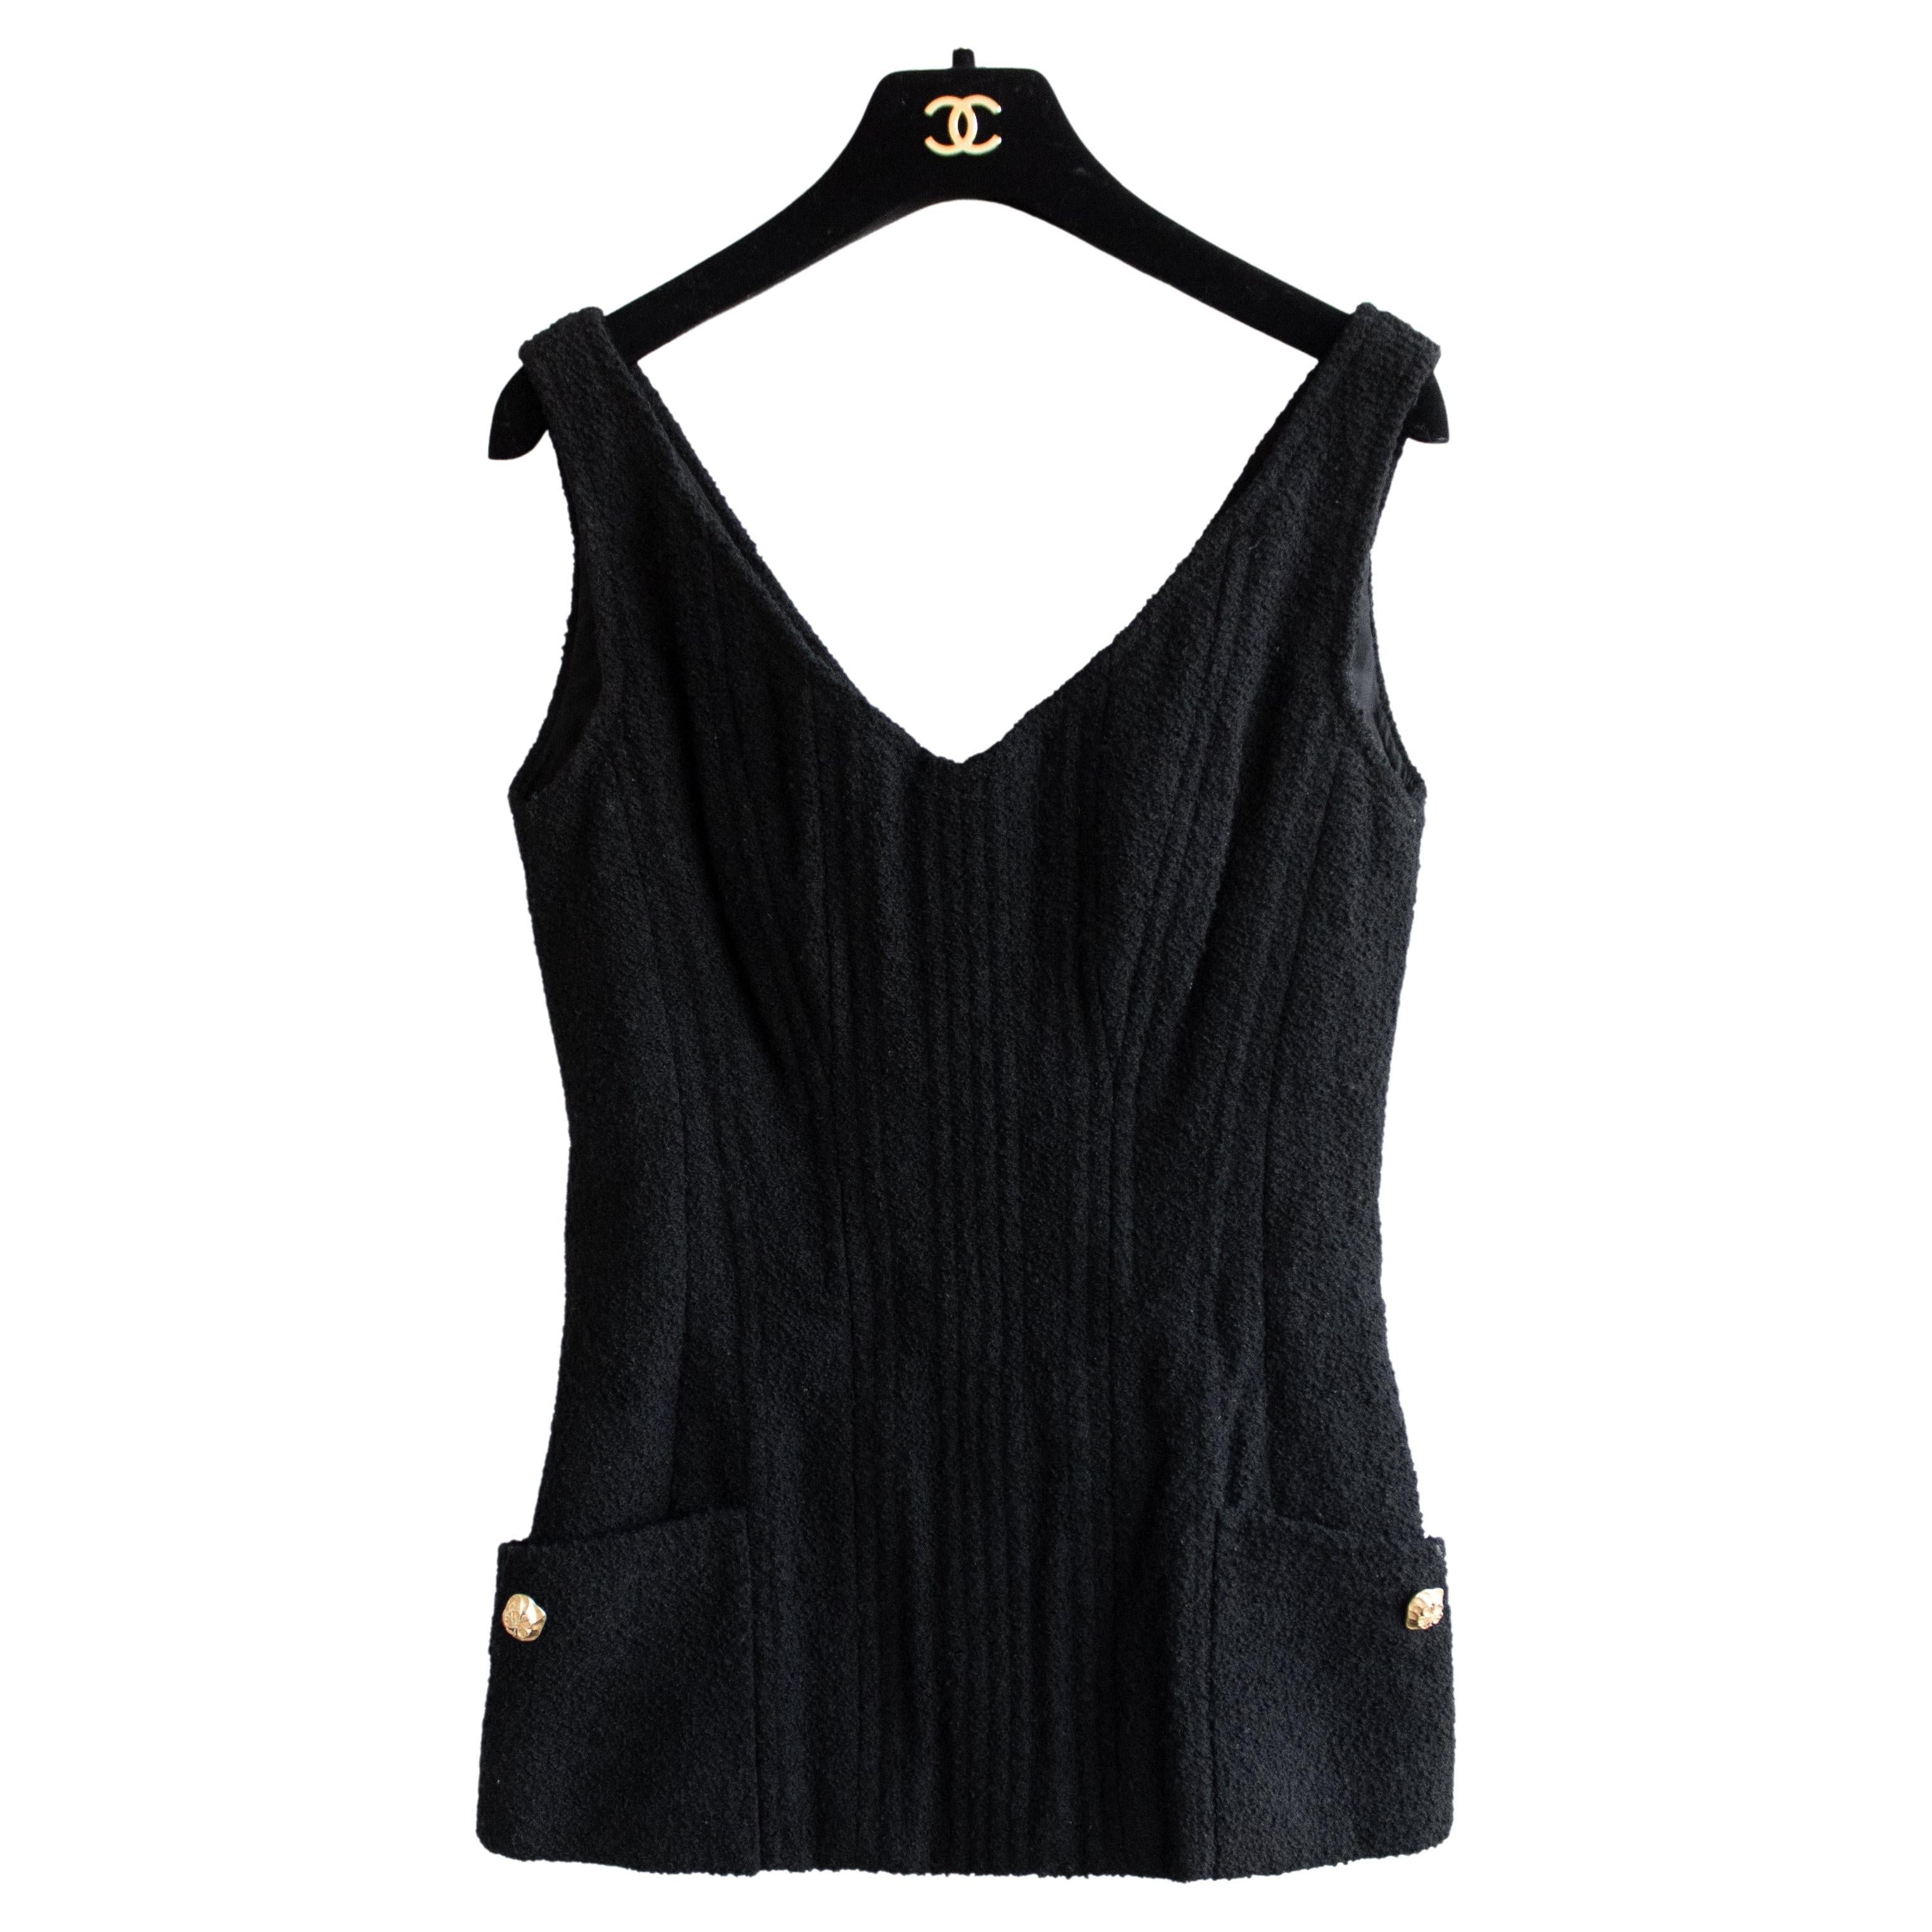 Iconic Chanel Vintage Spring 1993 Black Gold Clover Tweed Corset 93P Top